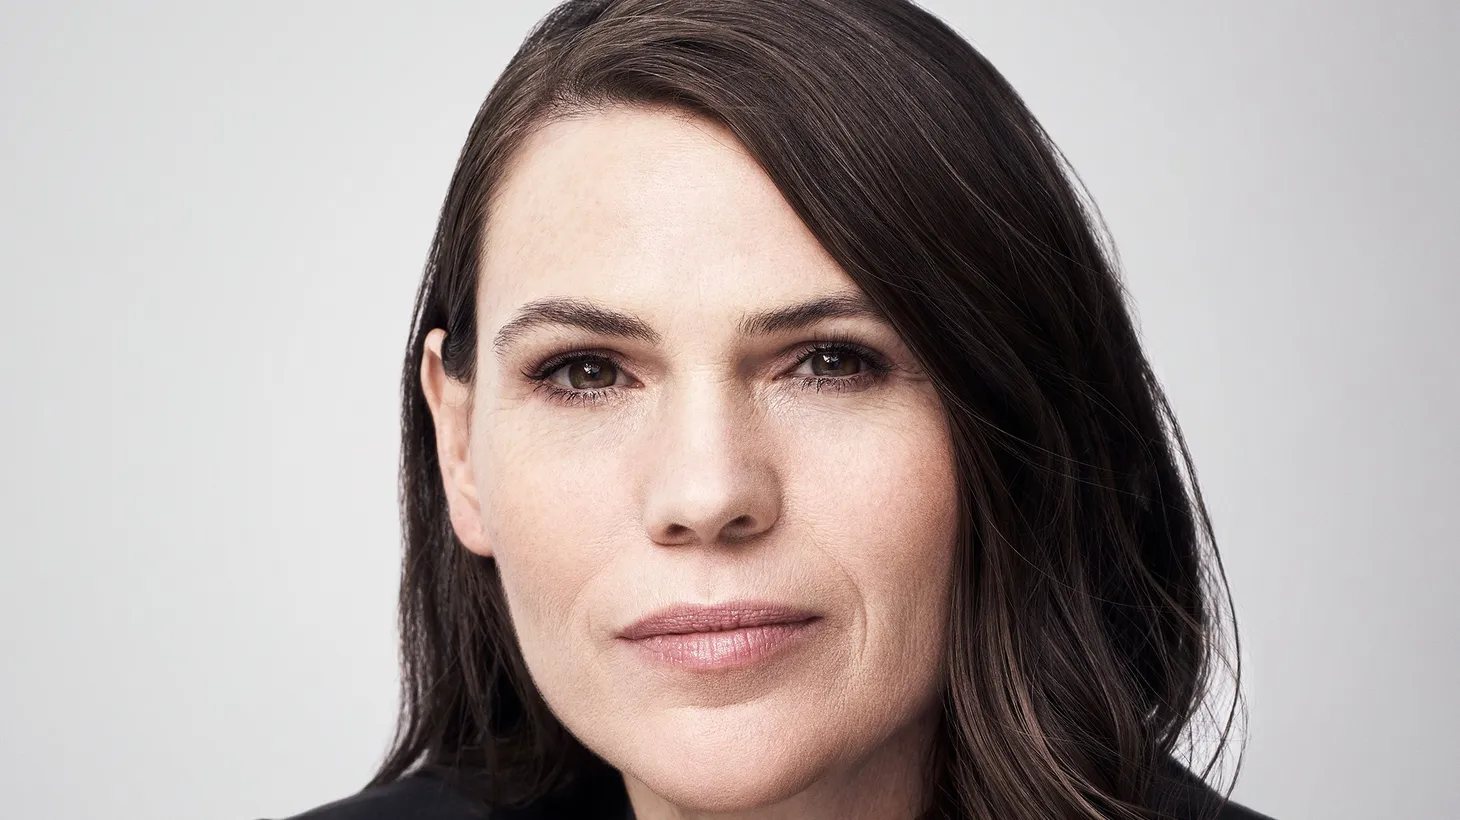 “The second I turn those songs on, I just get transported back to that place and those feelings, and it allows me to connect with who I was at that time,” says actor Clea DuVall. “It actually becomes very healing.”